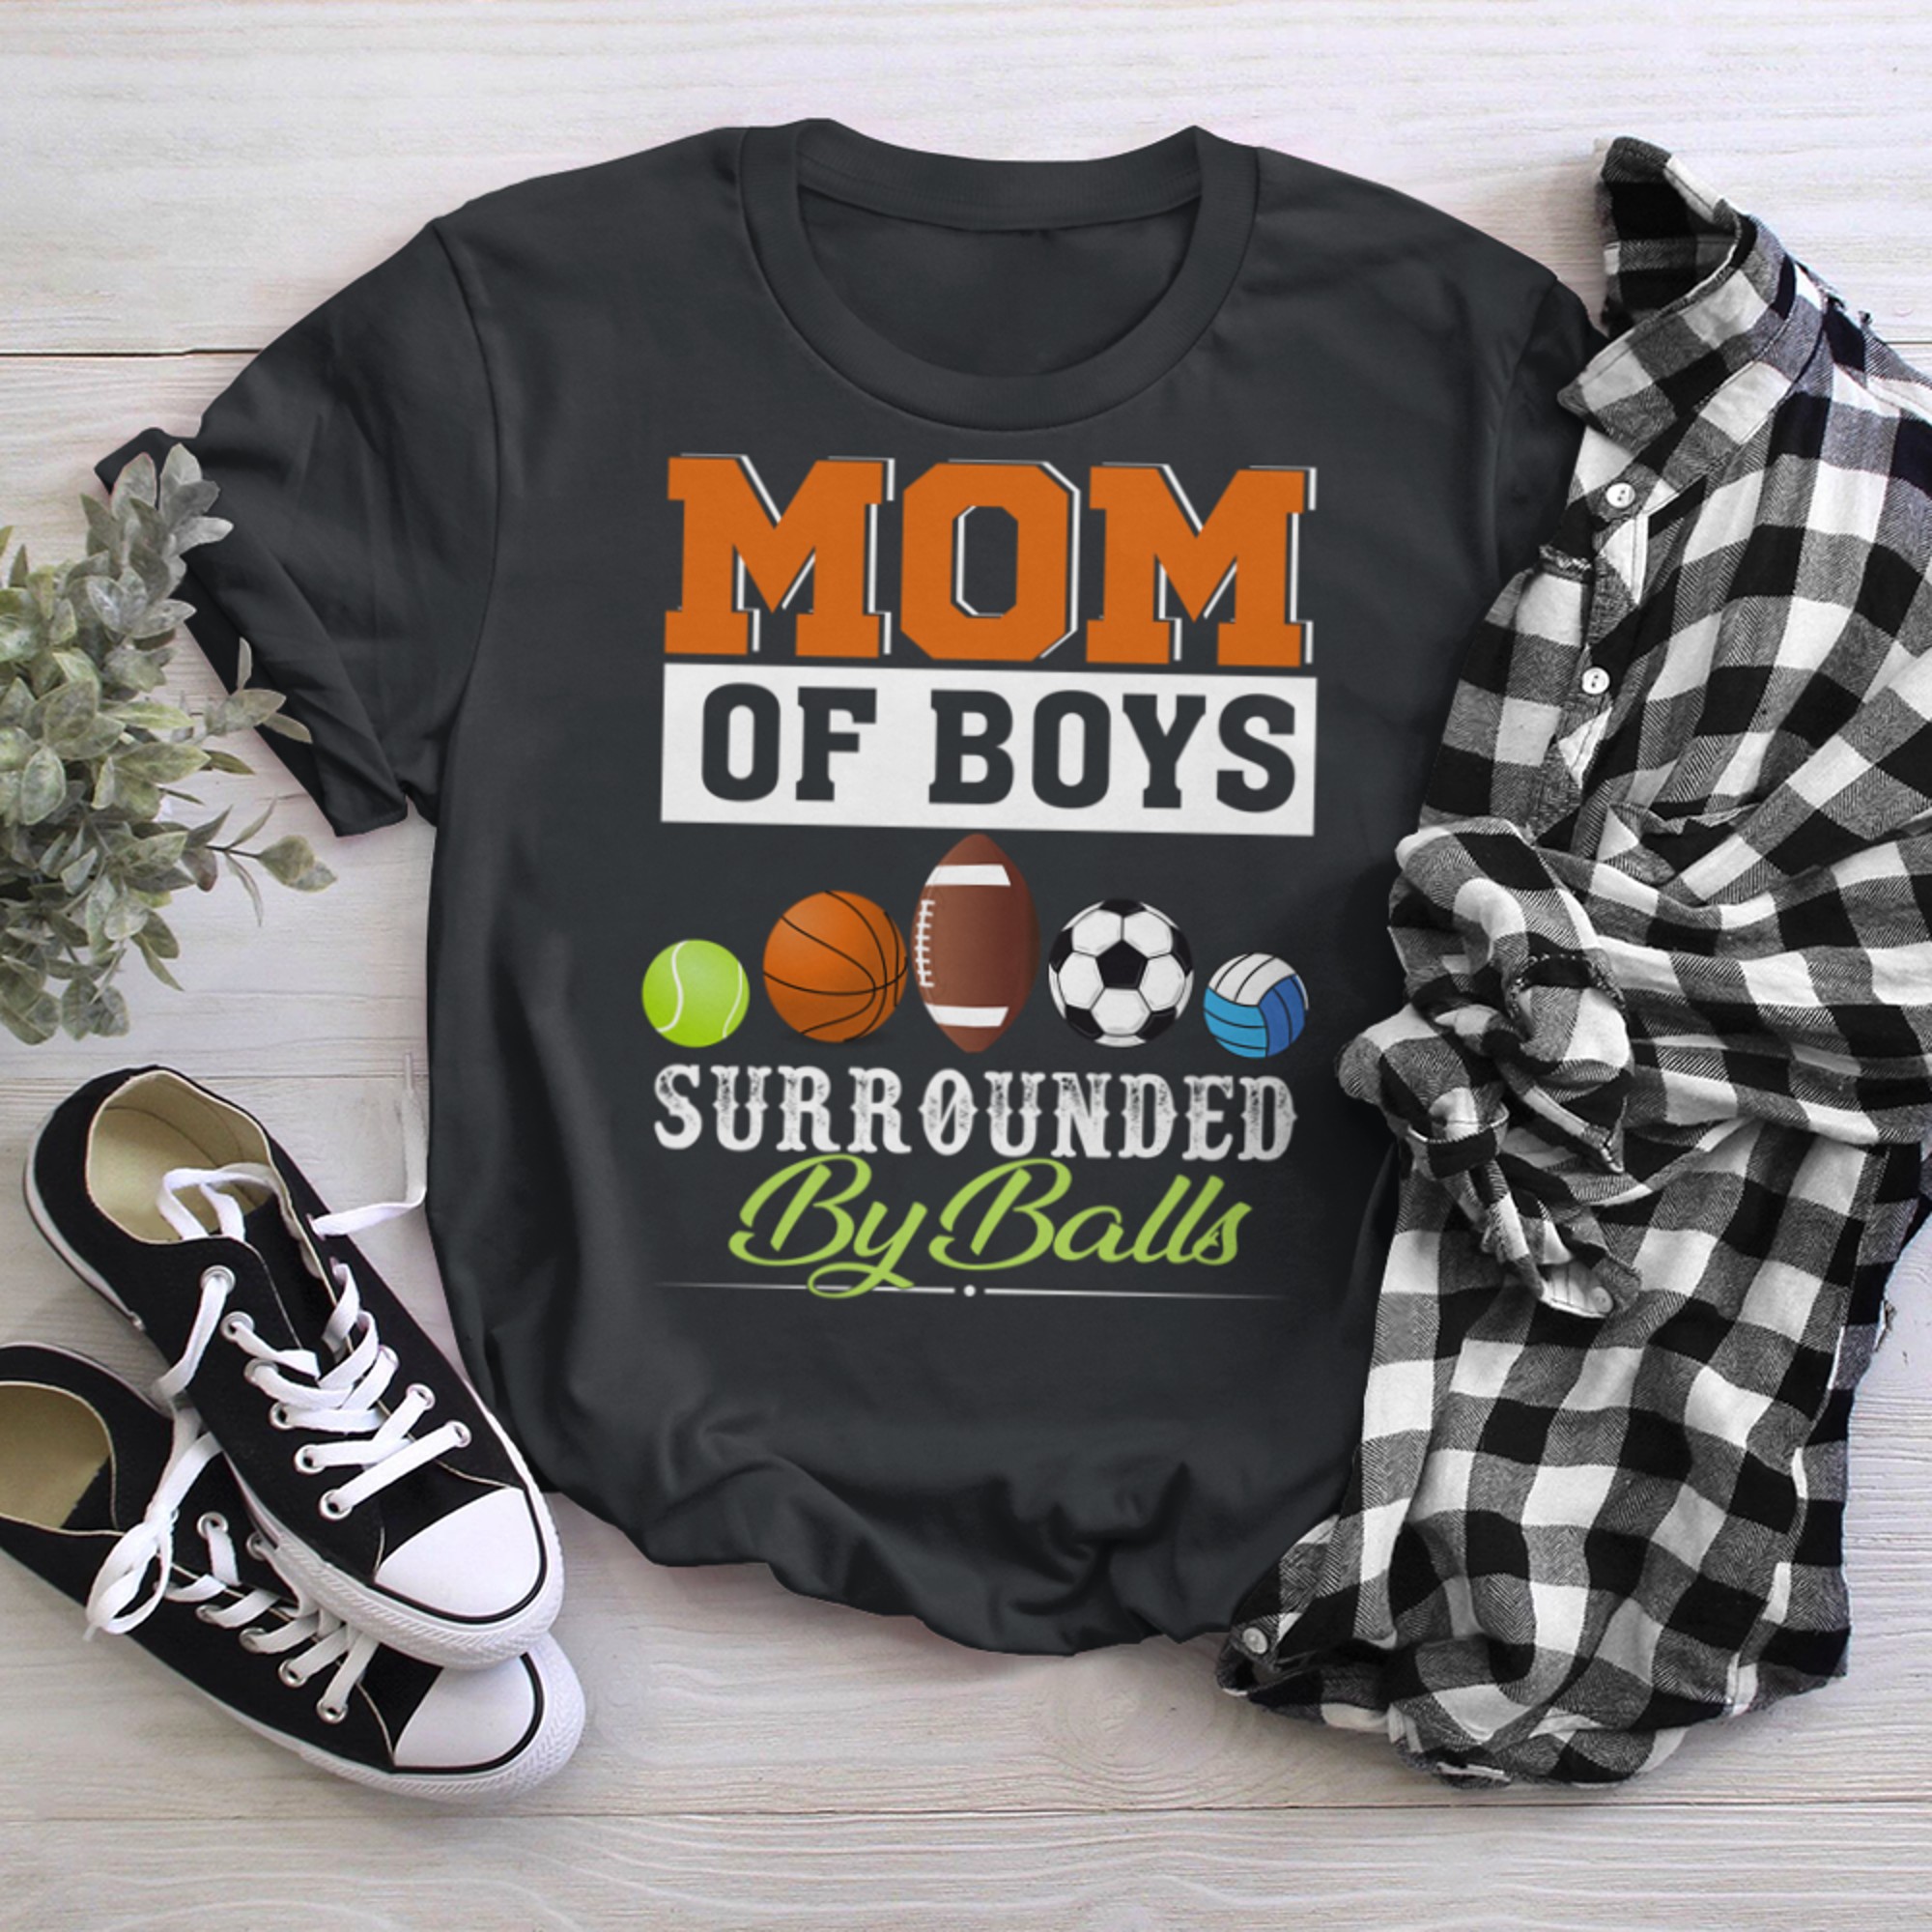 Mom Of Surrounded By Balls (1) t-shirt black